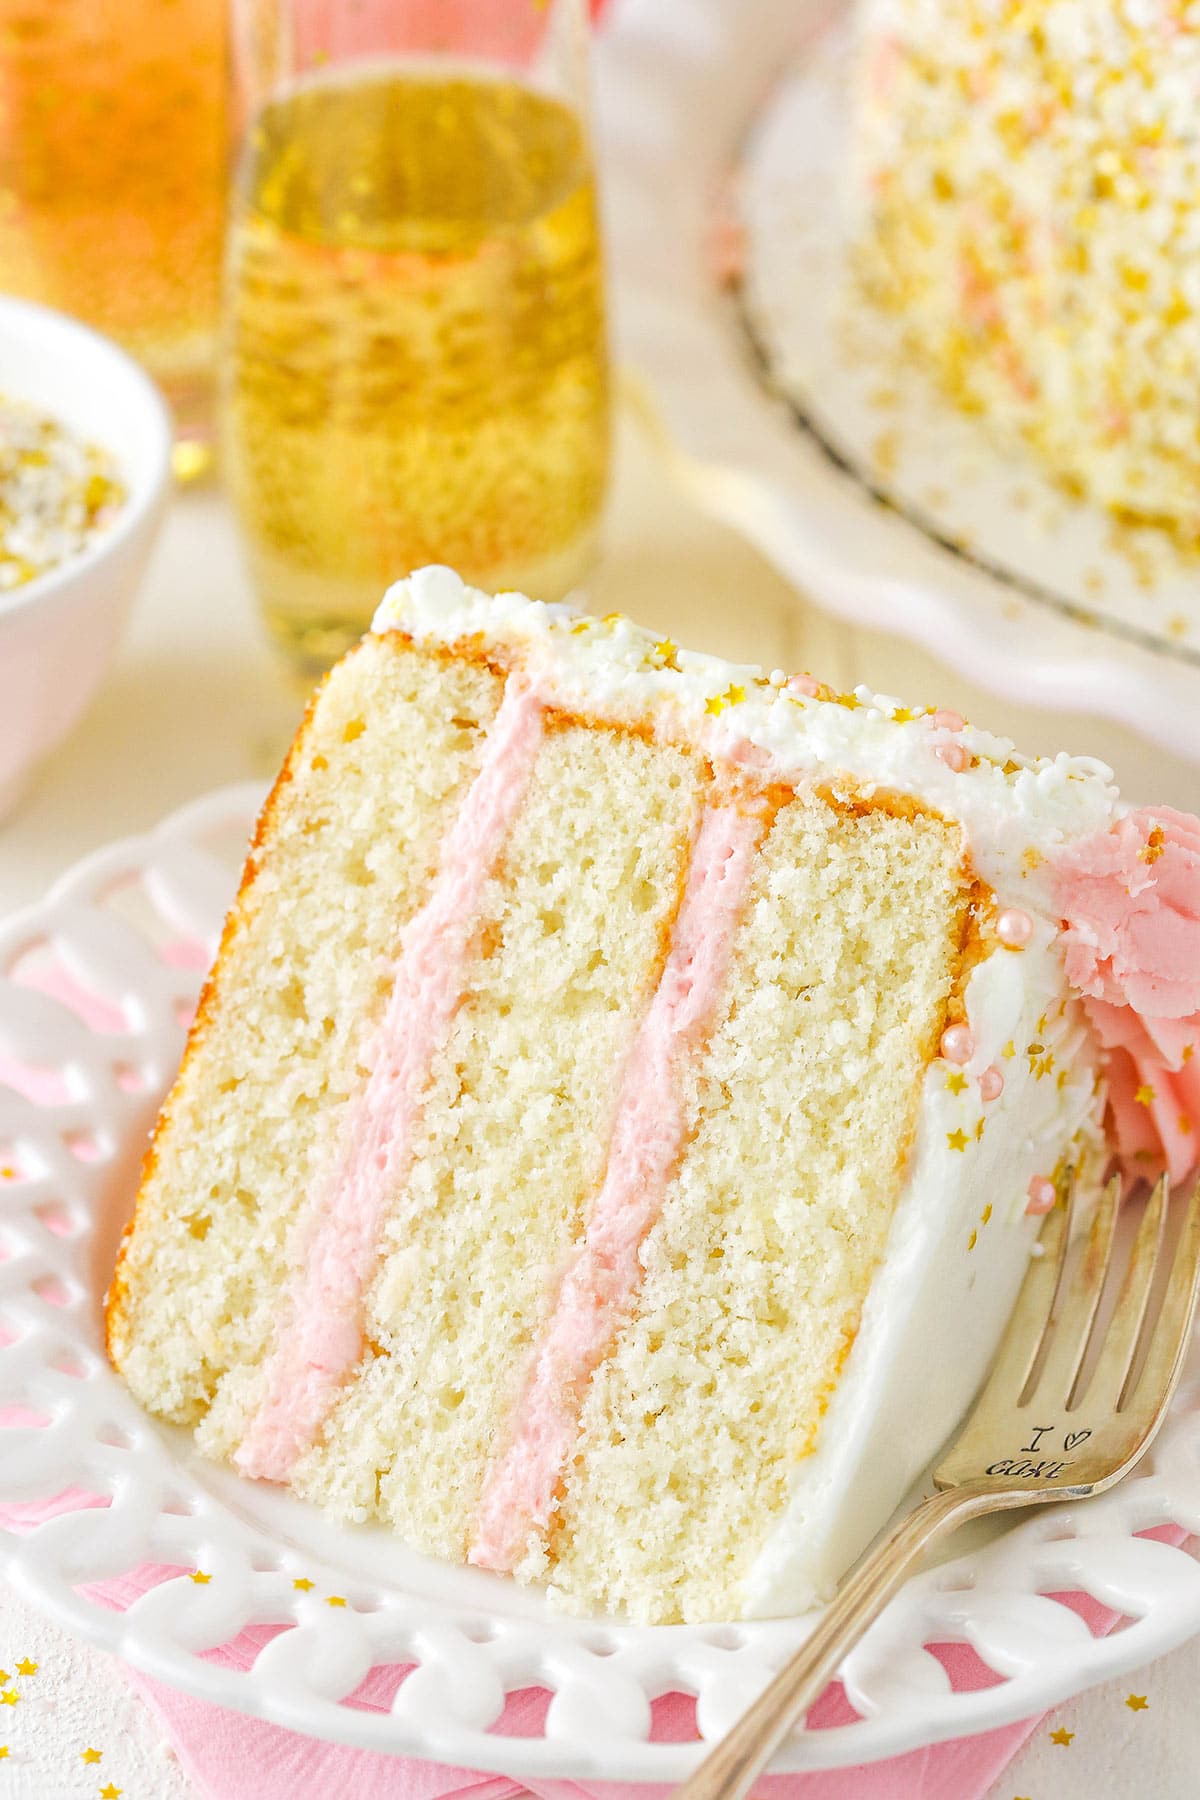 A slice of strawberry champagne layer cake on a plate with the remaining cake visible in the background